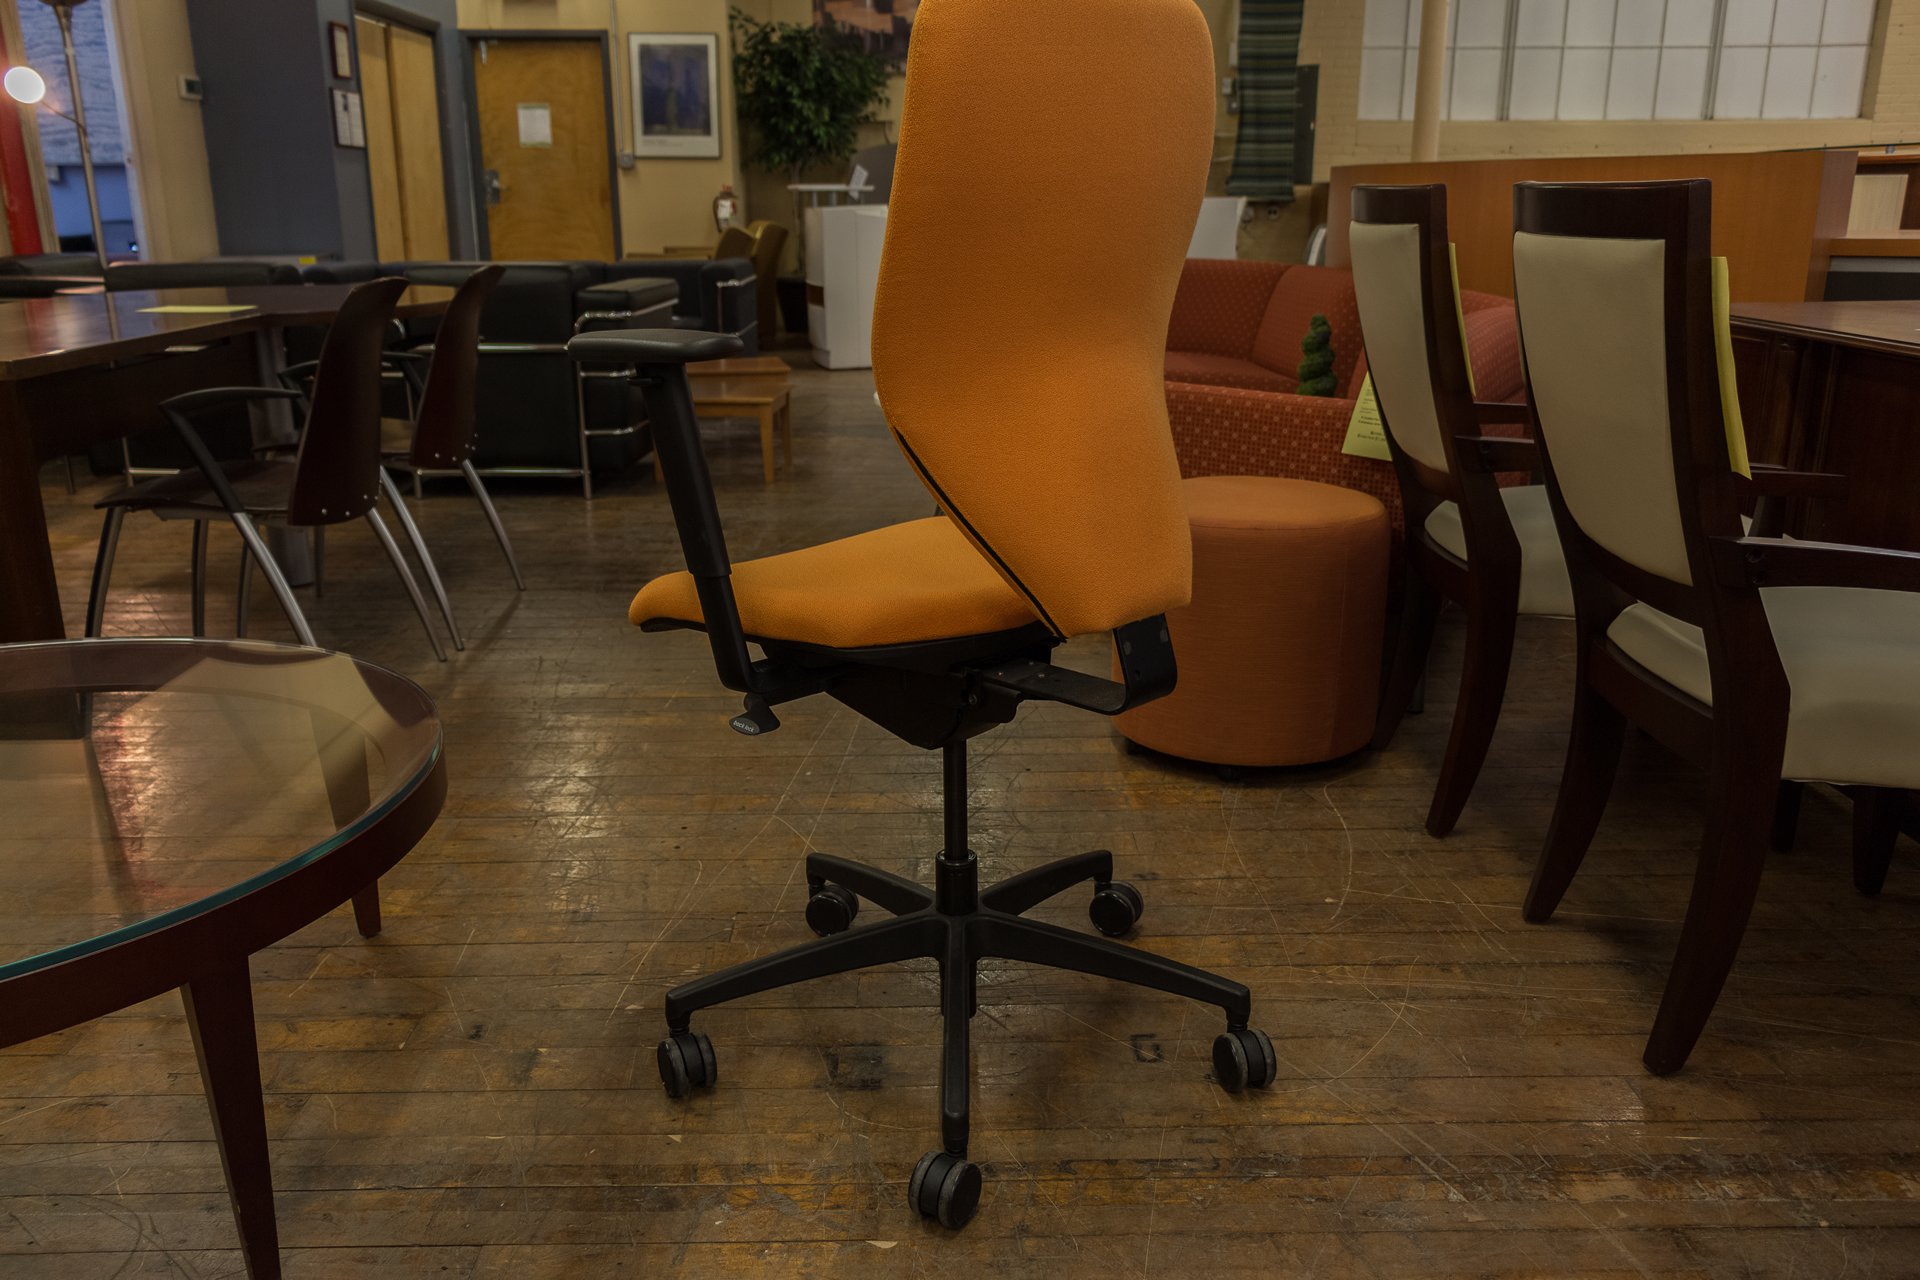 peartreeofficefurniture_peartreeofficefurniture_peartreeofficefurniture_boss-design-multi-function-task-chairs-in-red-blue-and-orange-9.jpg